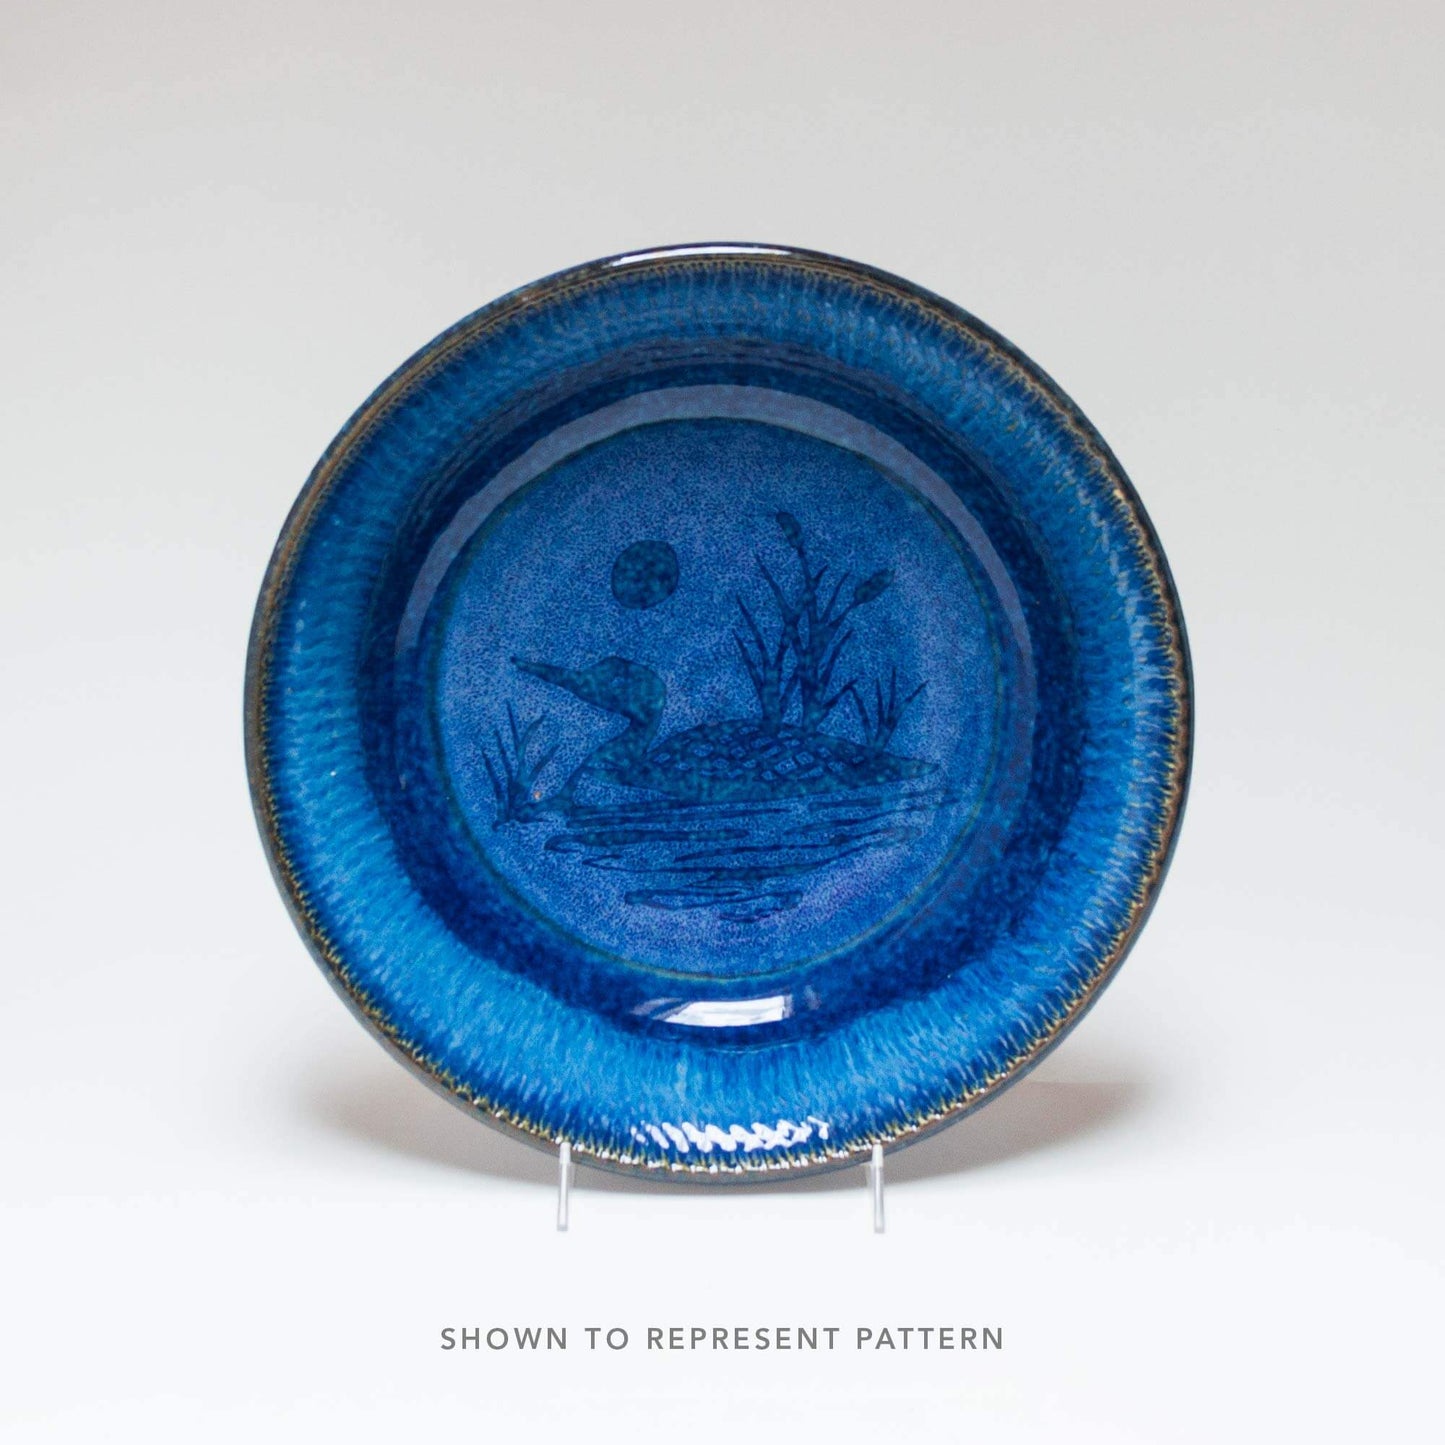 Handmade Pottery Harvest Bowl in Blue Loon pattern made by Georgetown Pottery in Maine